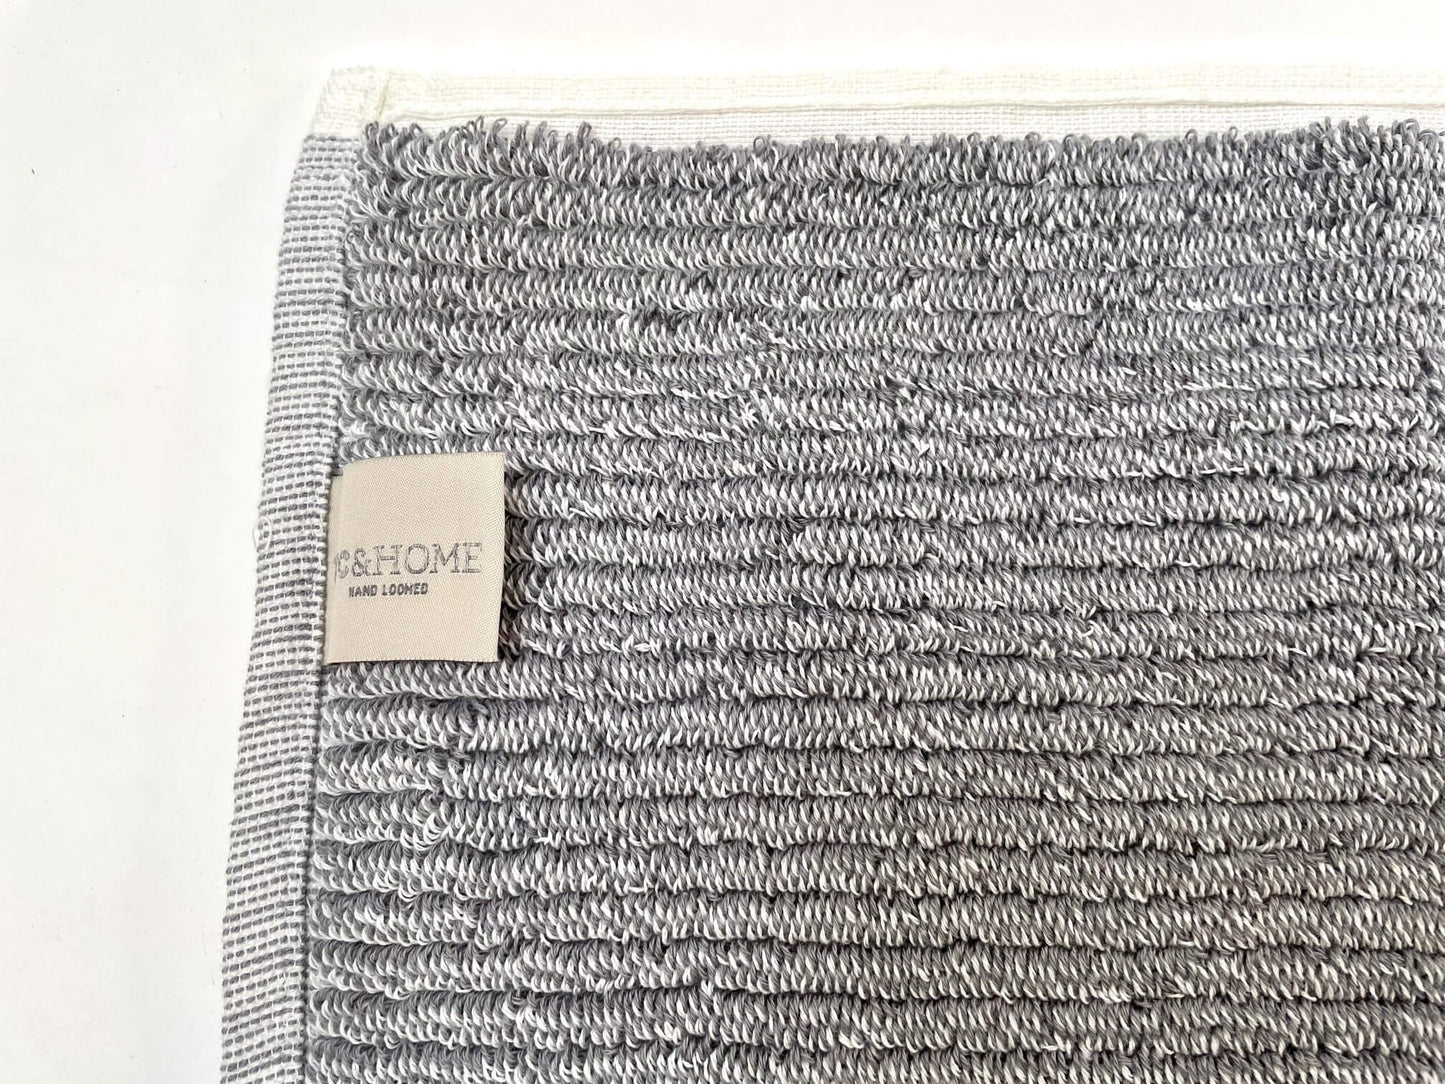 Bonini Silver Gray by Turkish Towel Collection